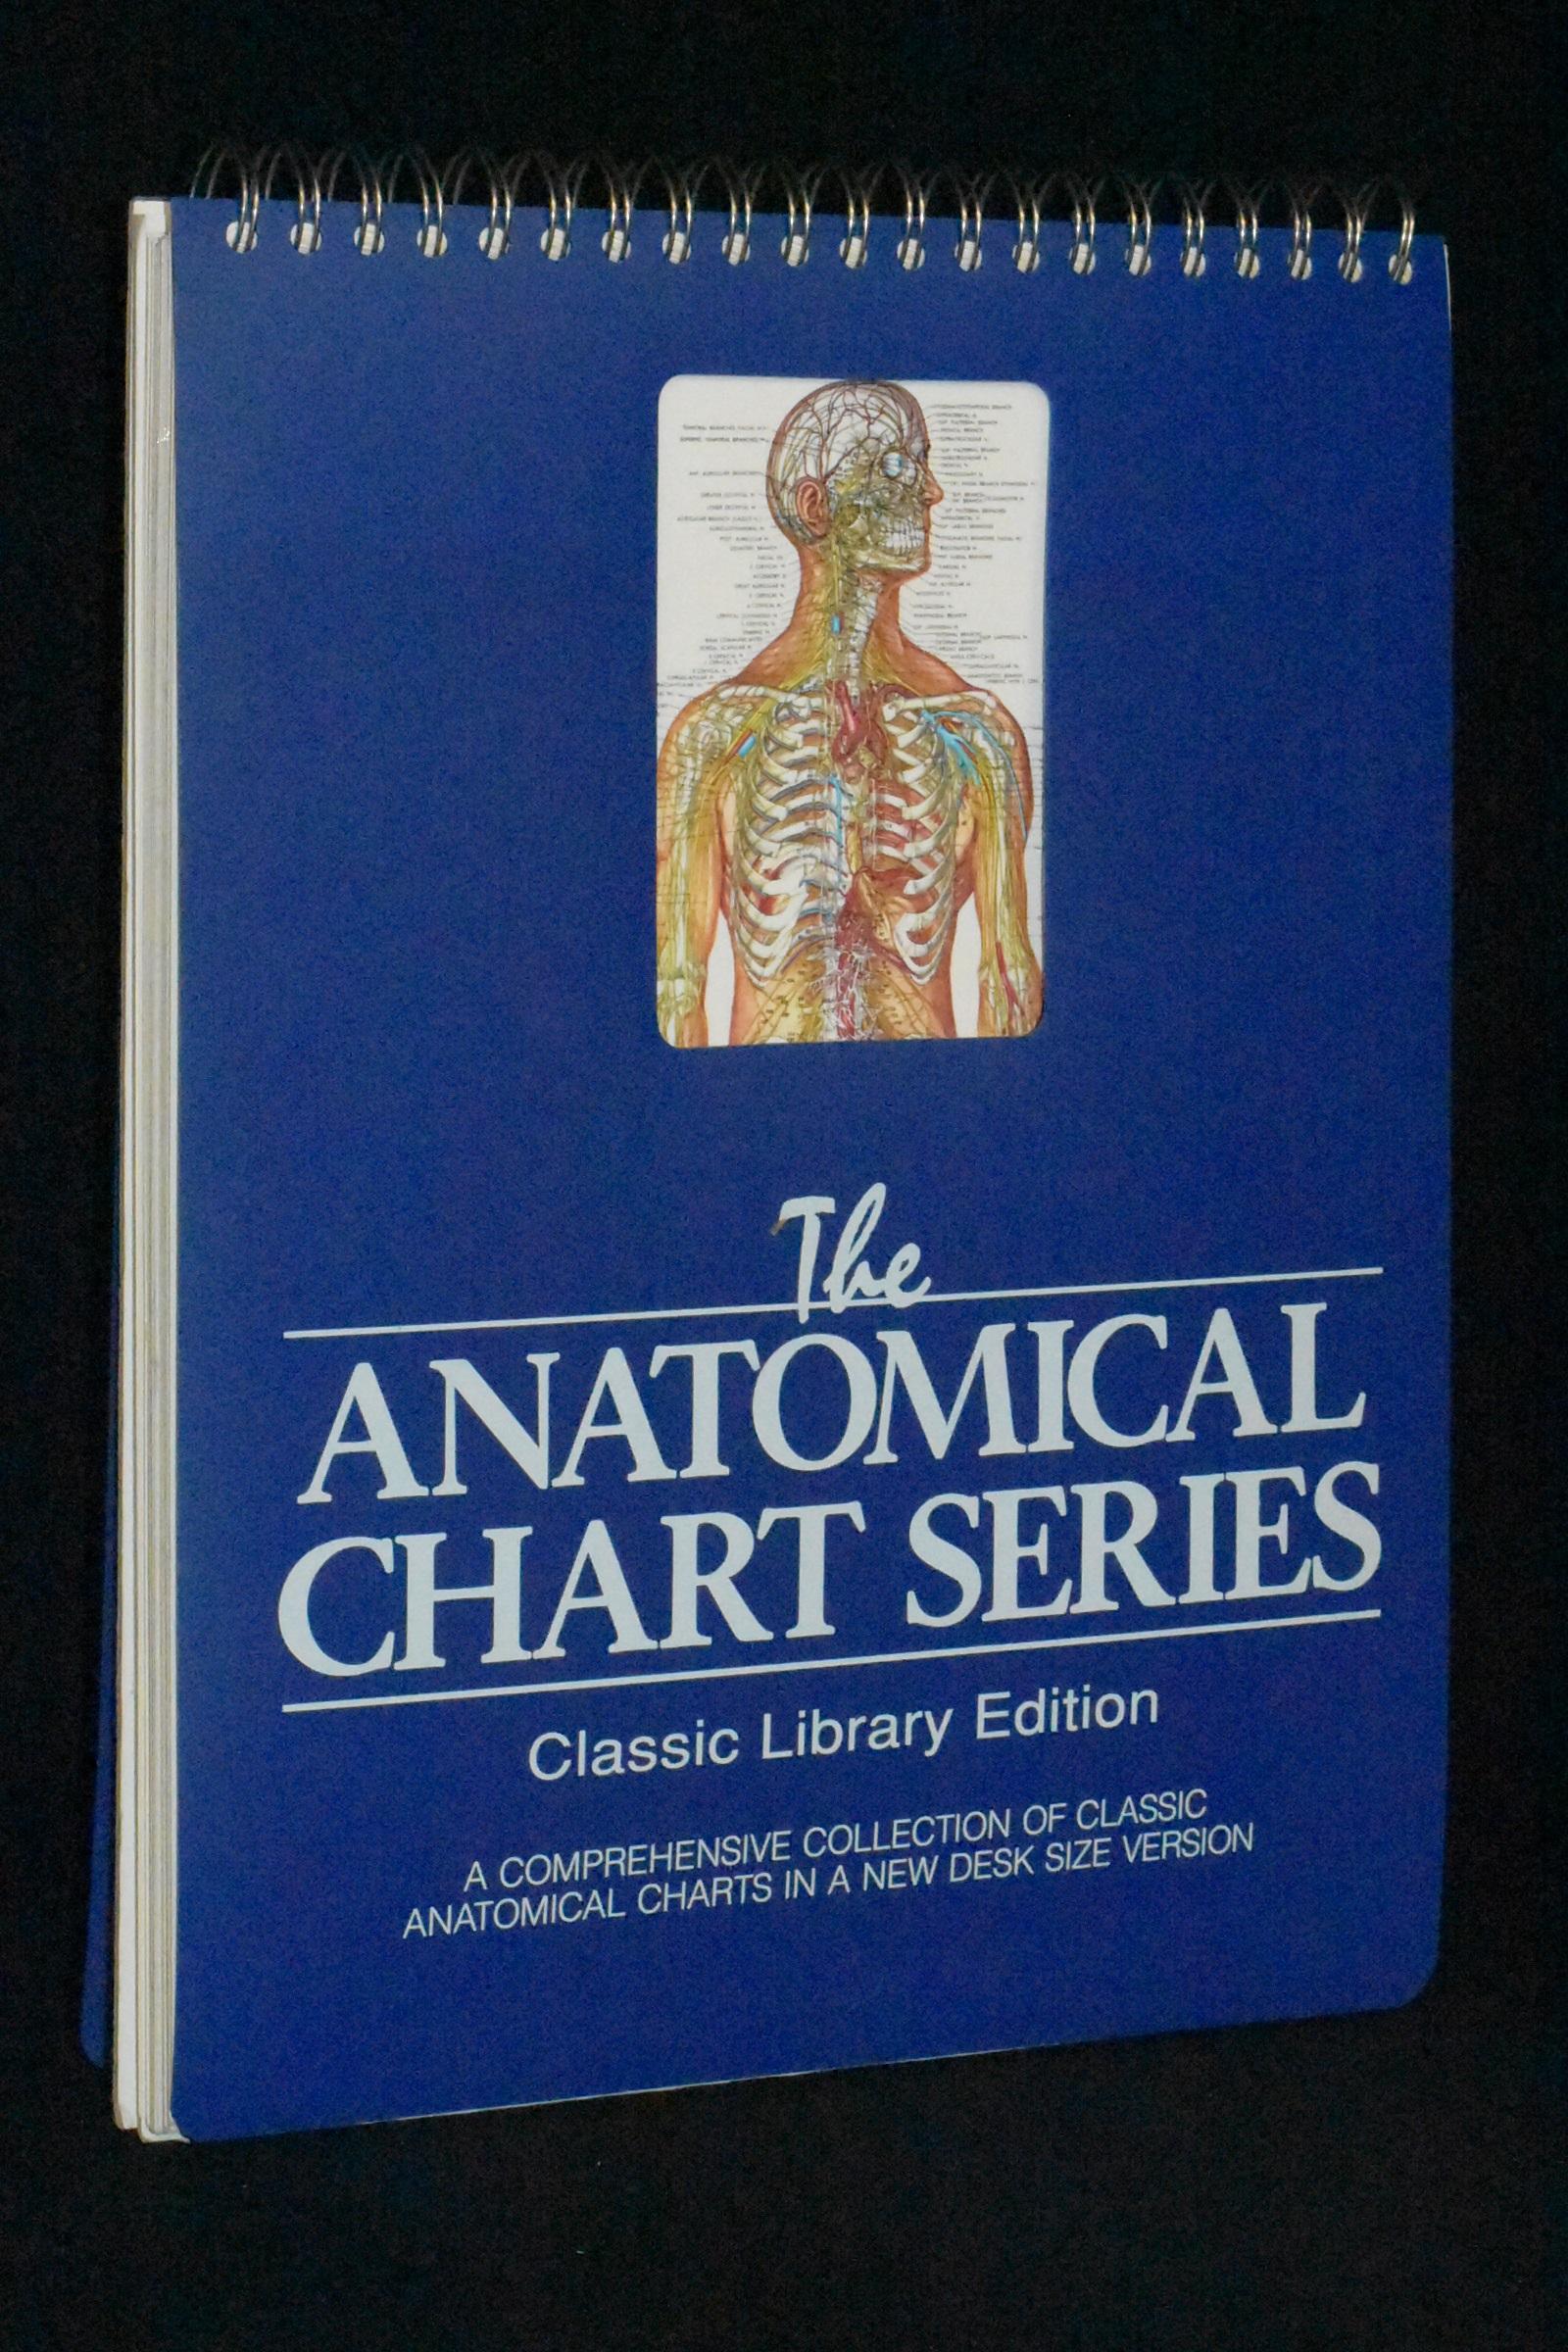 The Anatomical Chart Series: Classic Library Edition: A Comprehensive Collection of Classic Anatomical Charts in a Desk Size Version - Peter Bachin